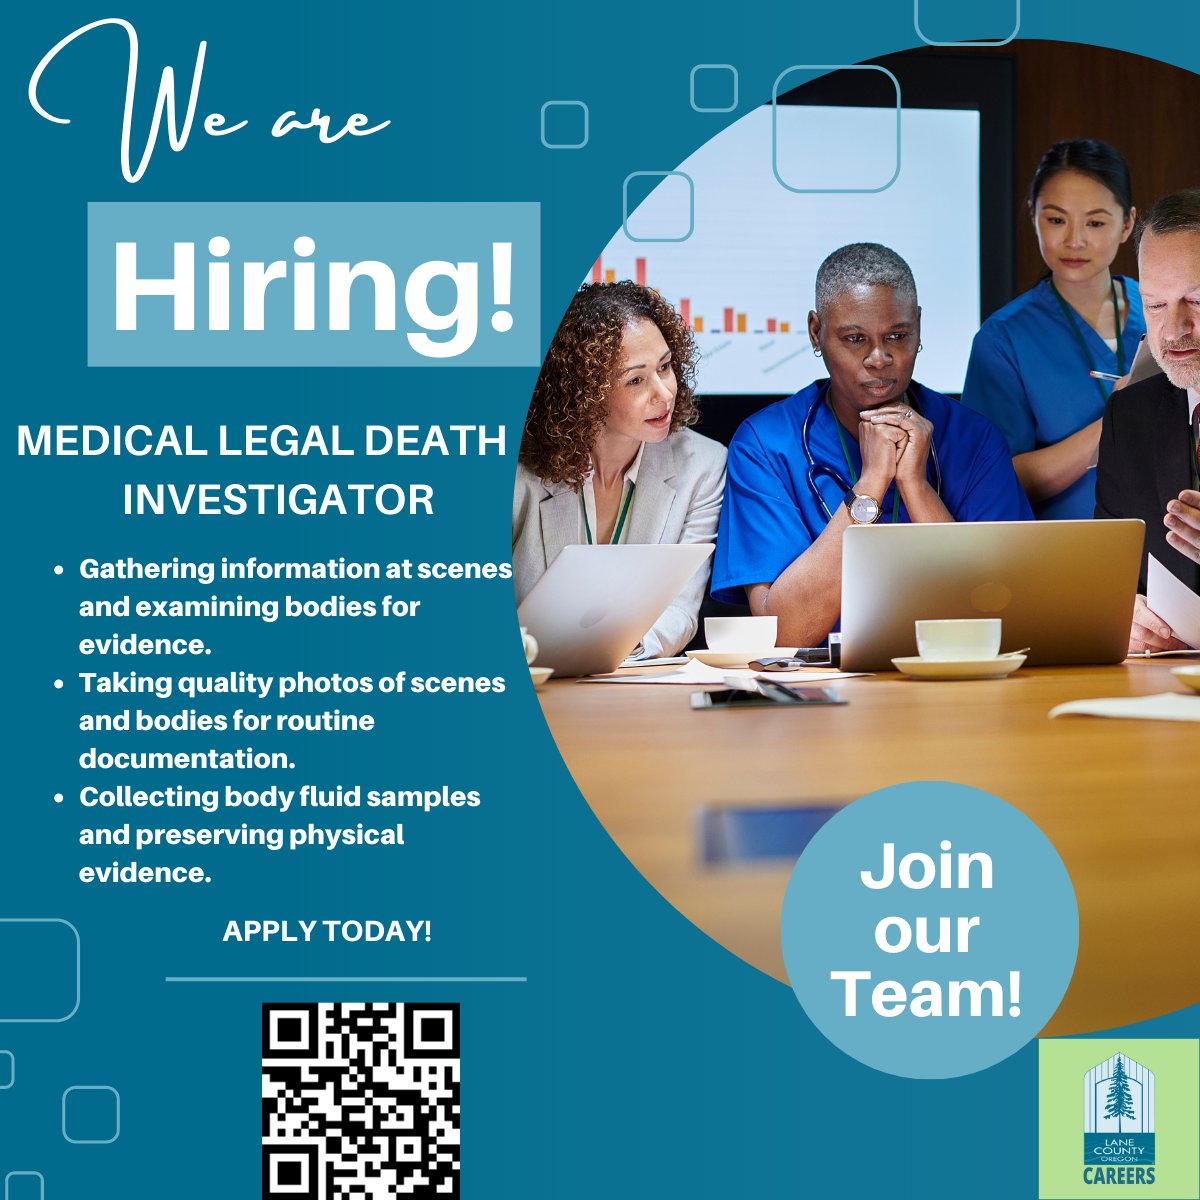 Lane County is HIRING a Medical-Legal Death Investigator to join our Team! Have investigative experience and a degree in biology, chemistry, or pharmacology? APPLY TODAY!
#LaneCountyGov #hiring #GovJobsRule #MedicalDeathInvestigations #ForensicJobs #MedicalExaminerJobs #GovJobs